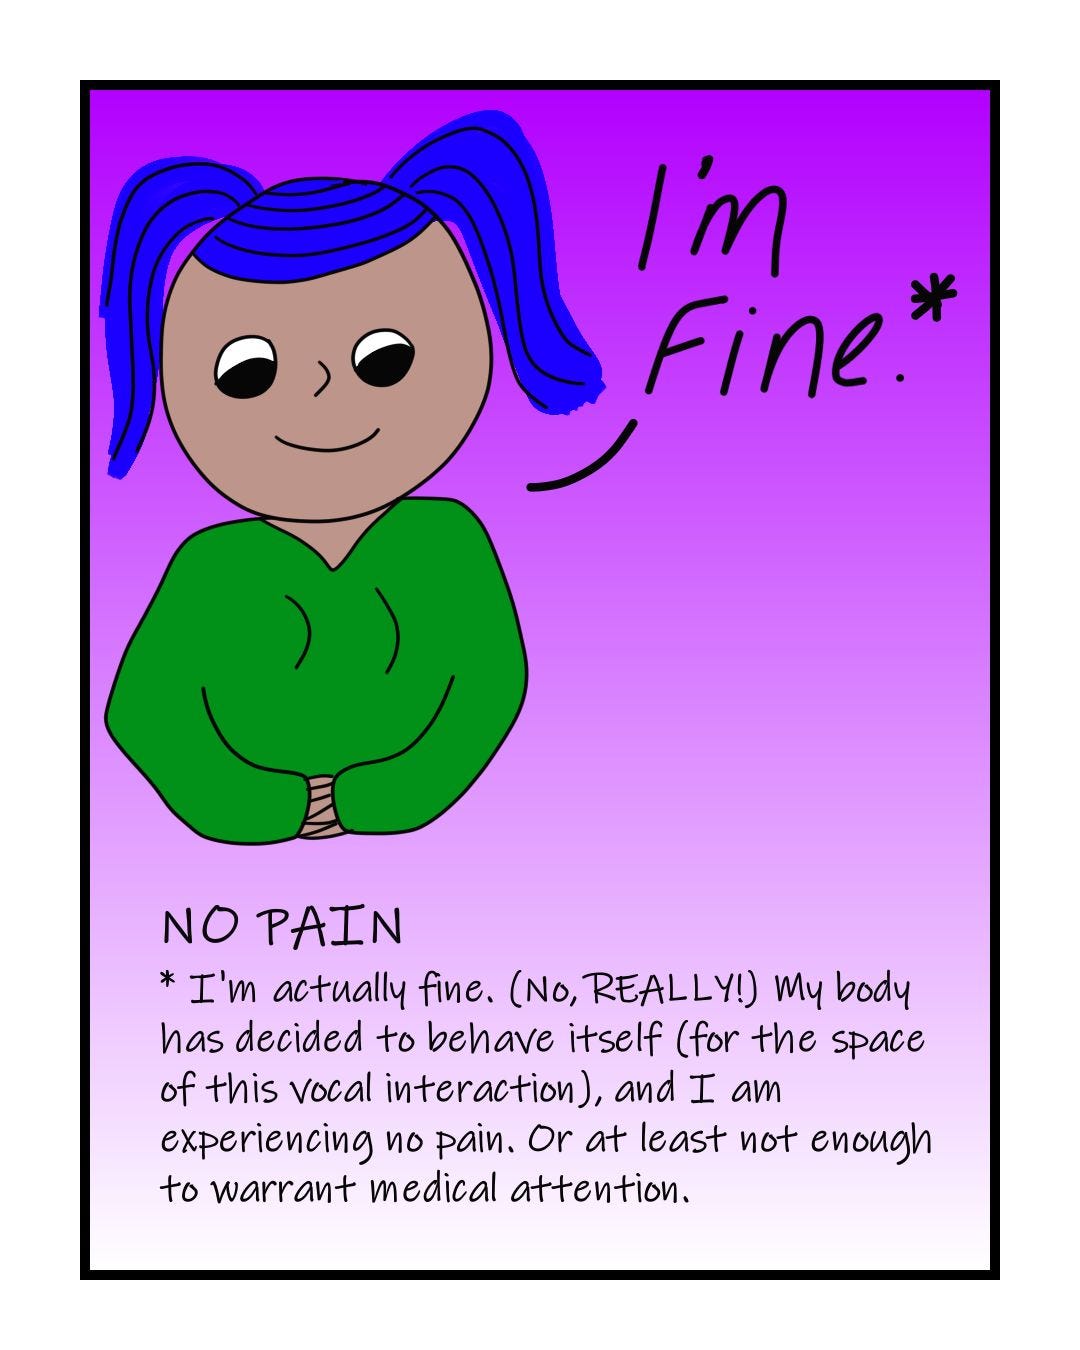 "I'm fine." NO PAIN (Translation: "I'm actually fine. (No, REALLY!) My body has decided to behave itself (for the space of this vocal interaction), and I am experiencing no pain. Or at least not enough to warrant medical attention."